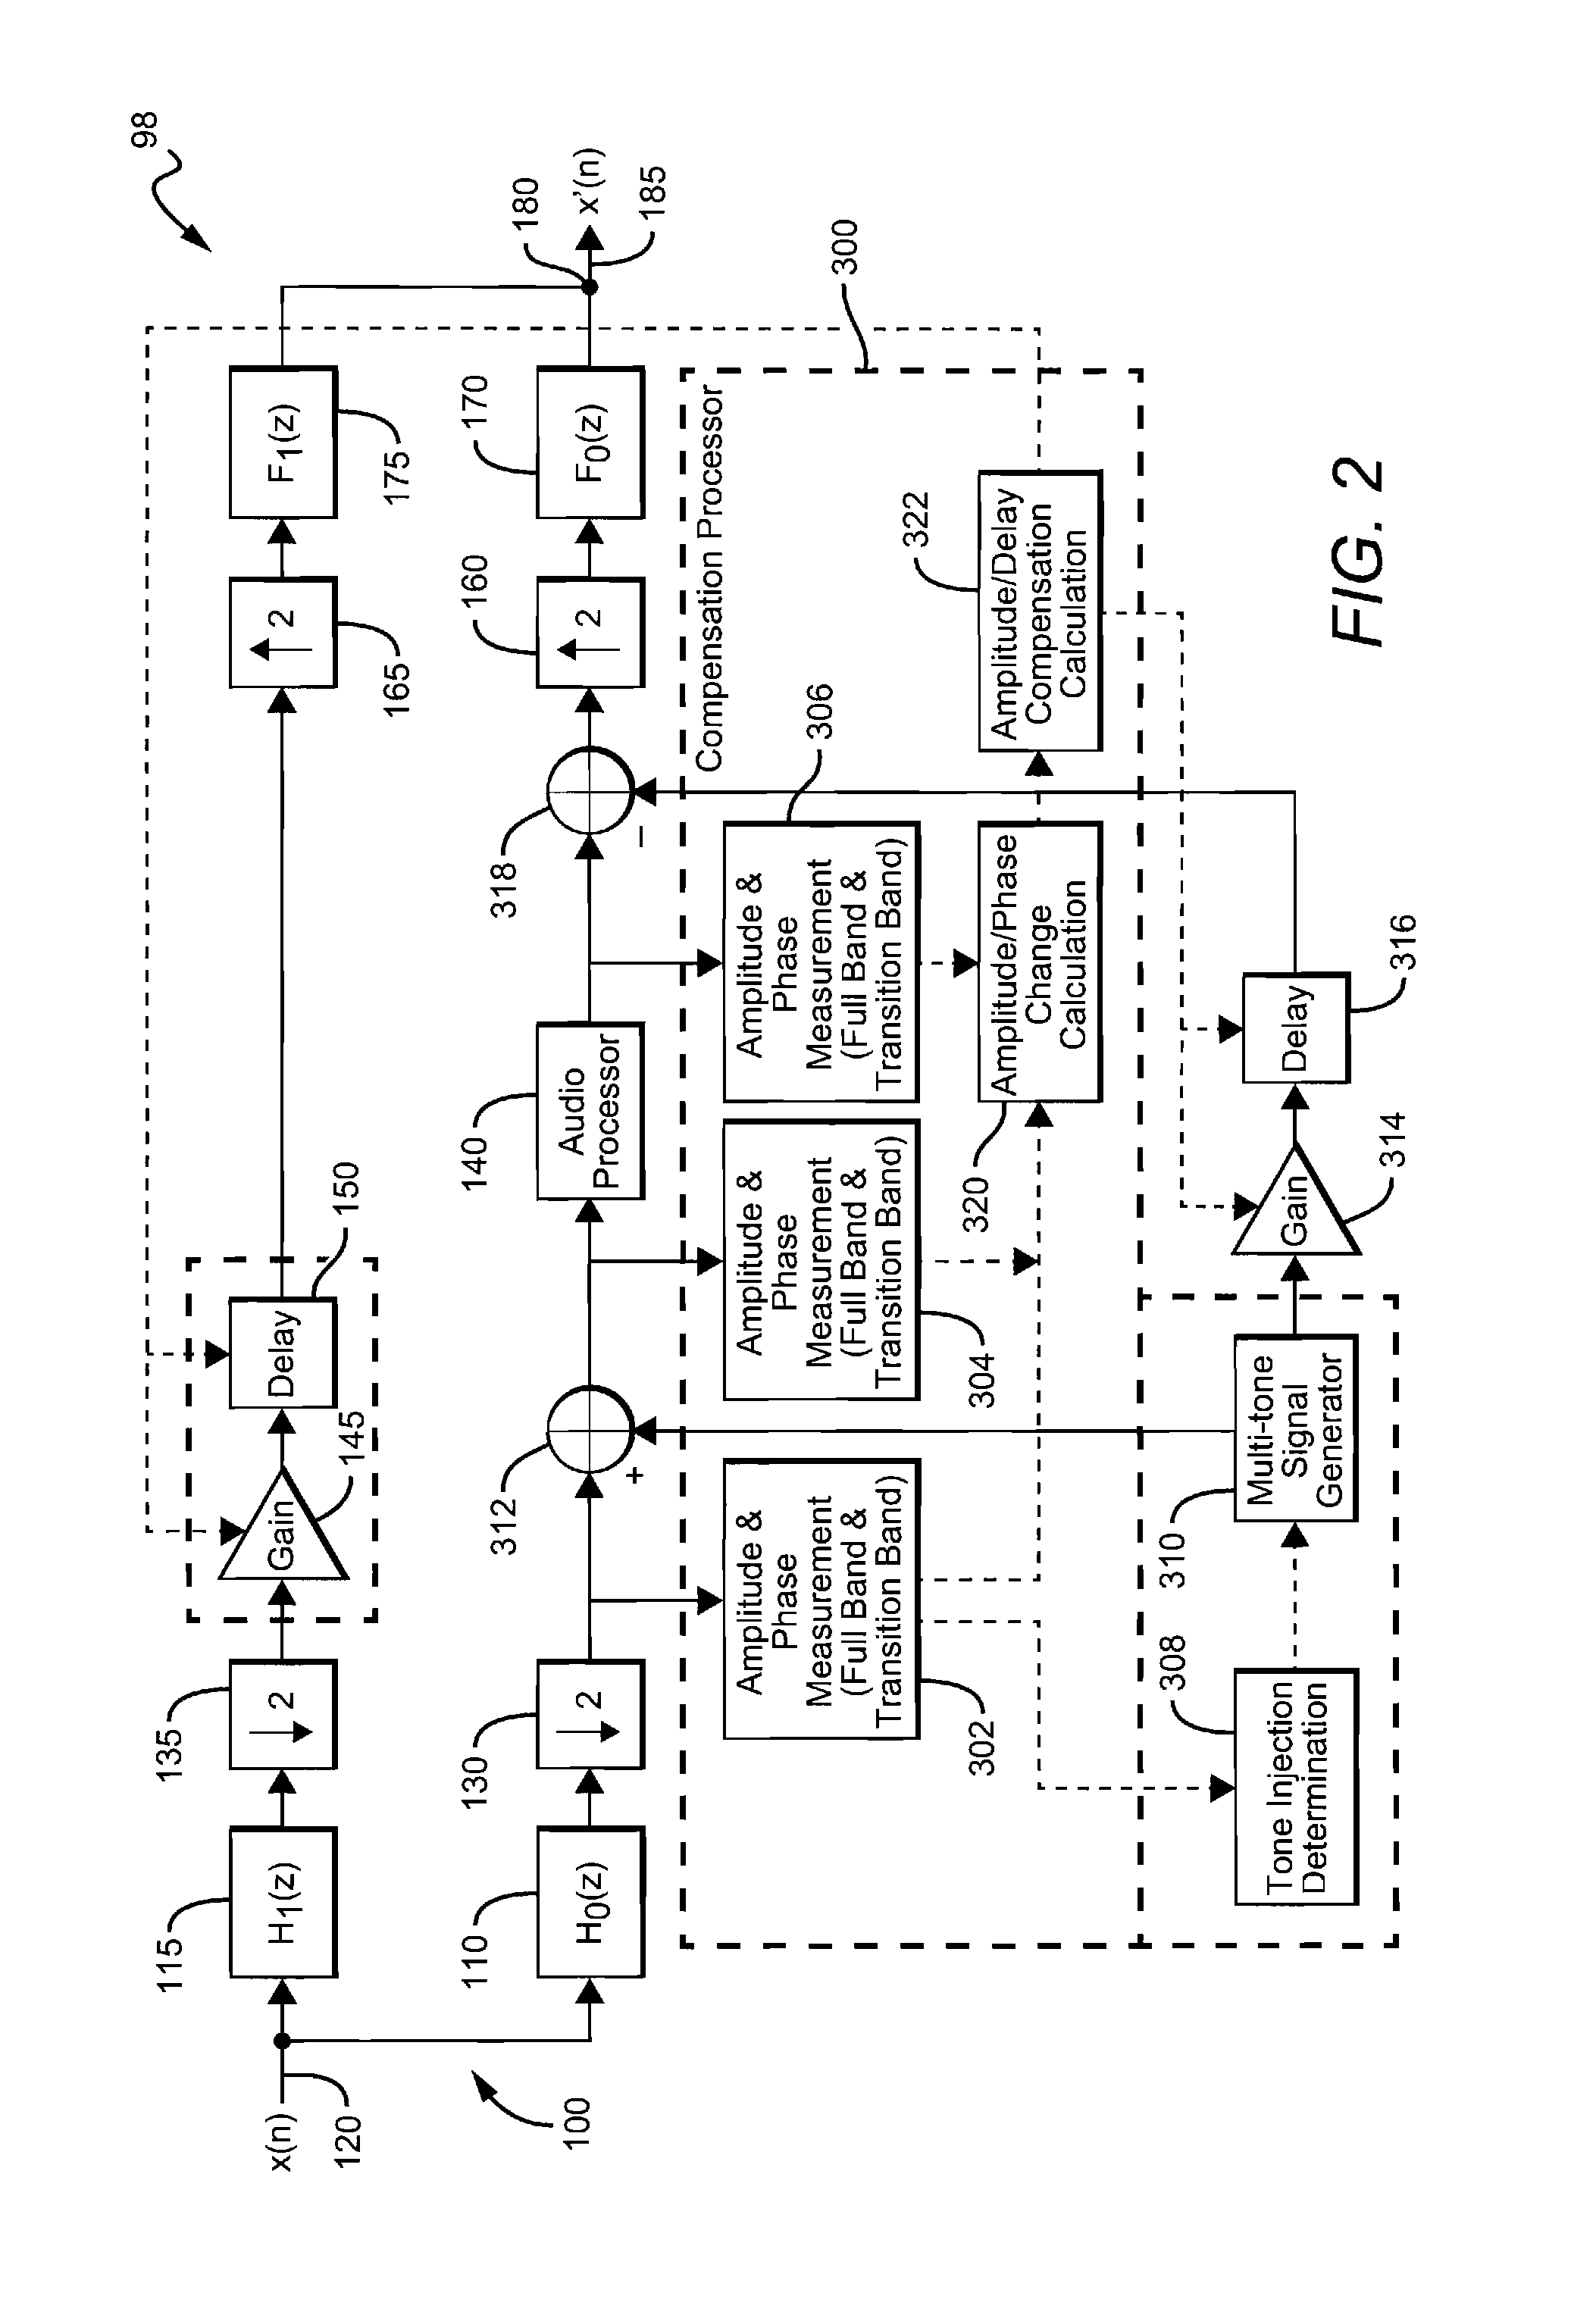 Multi-rate system for audio processing